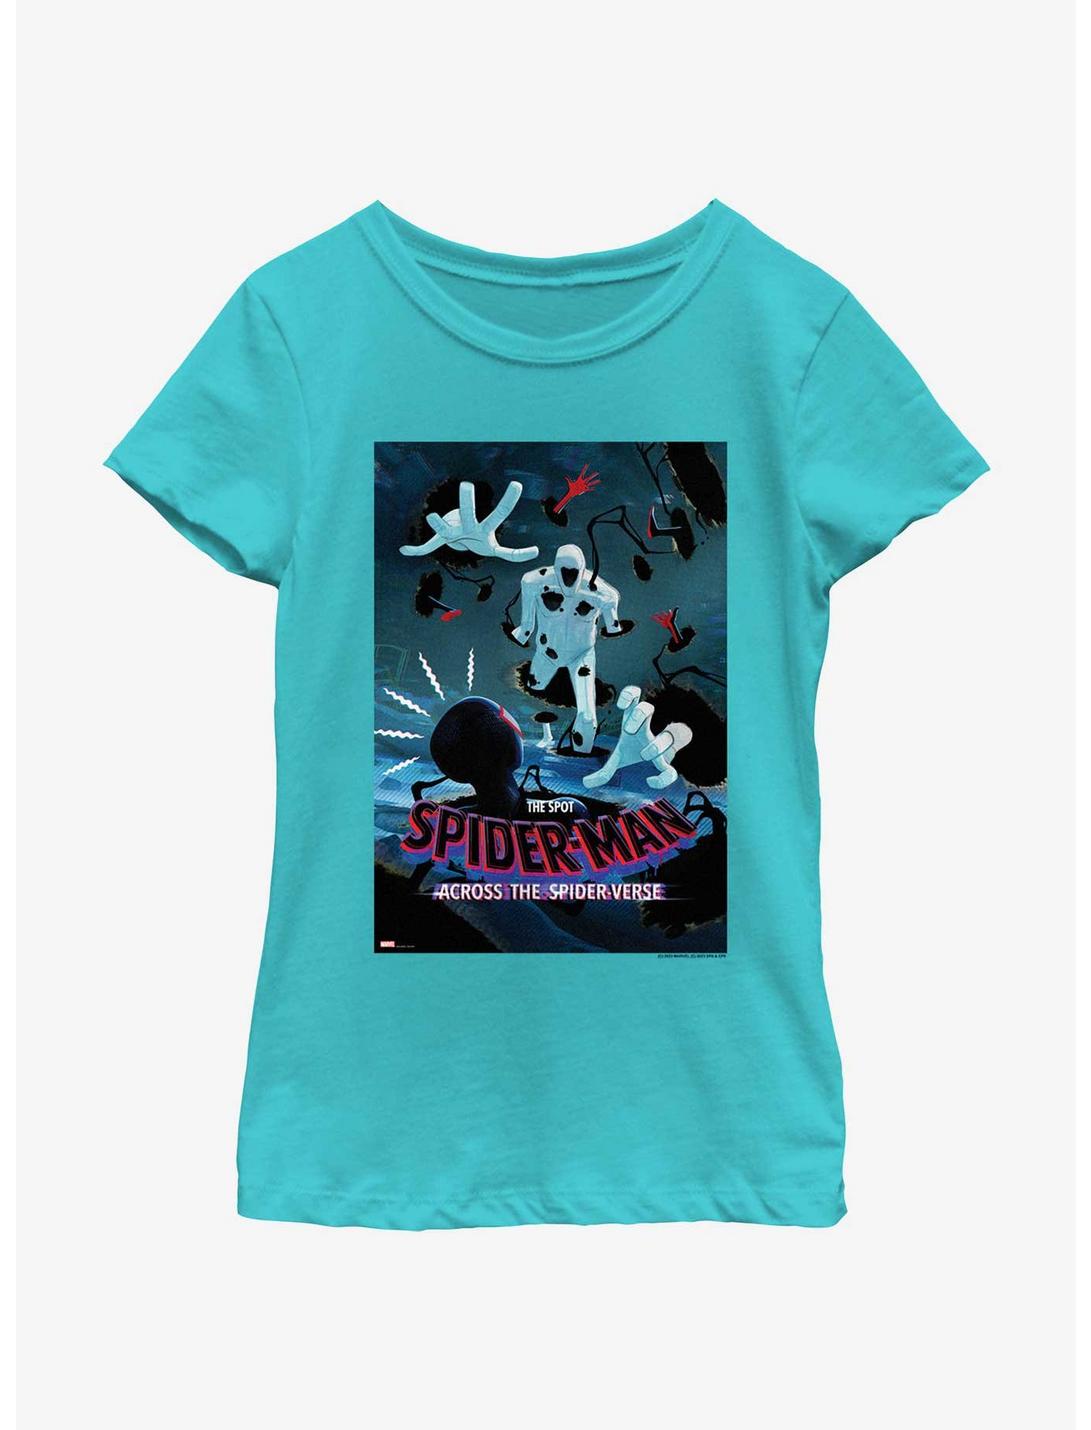 Marvel Spider-Man: Across The Spider-Verse The Spot vs. Spider-Man Poster Youth Girls T-Shirt, TAHI BLUE, hi-res